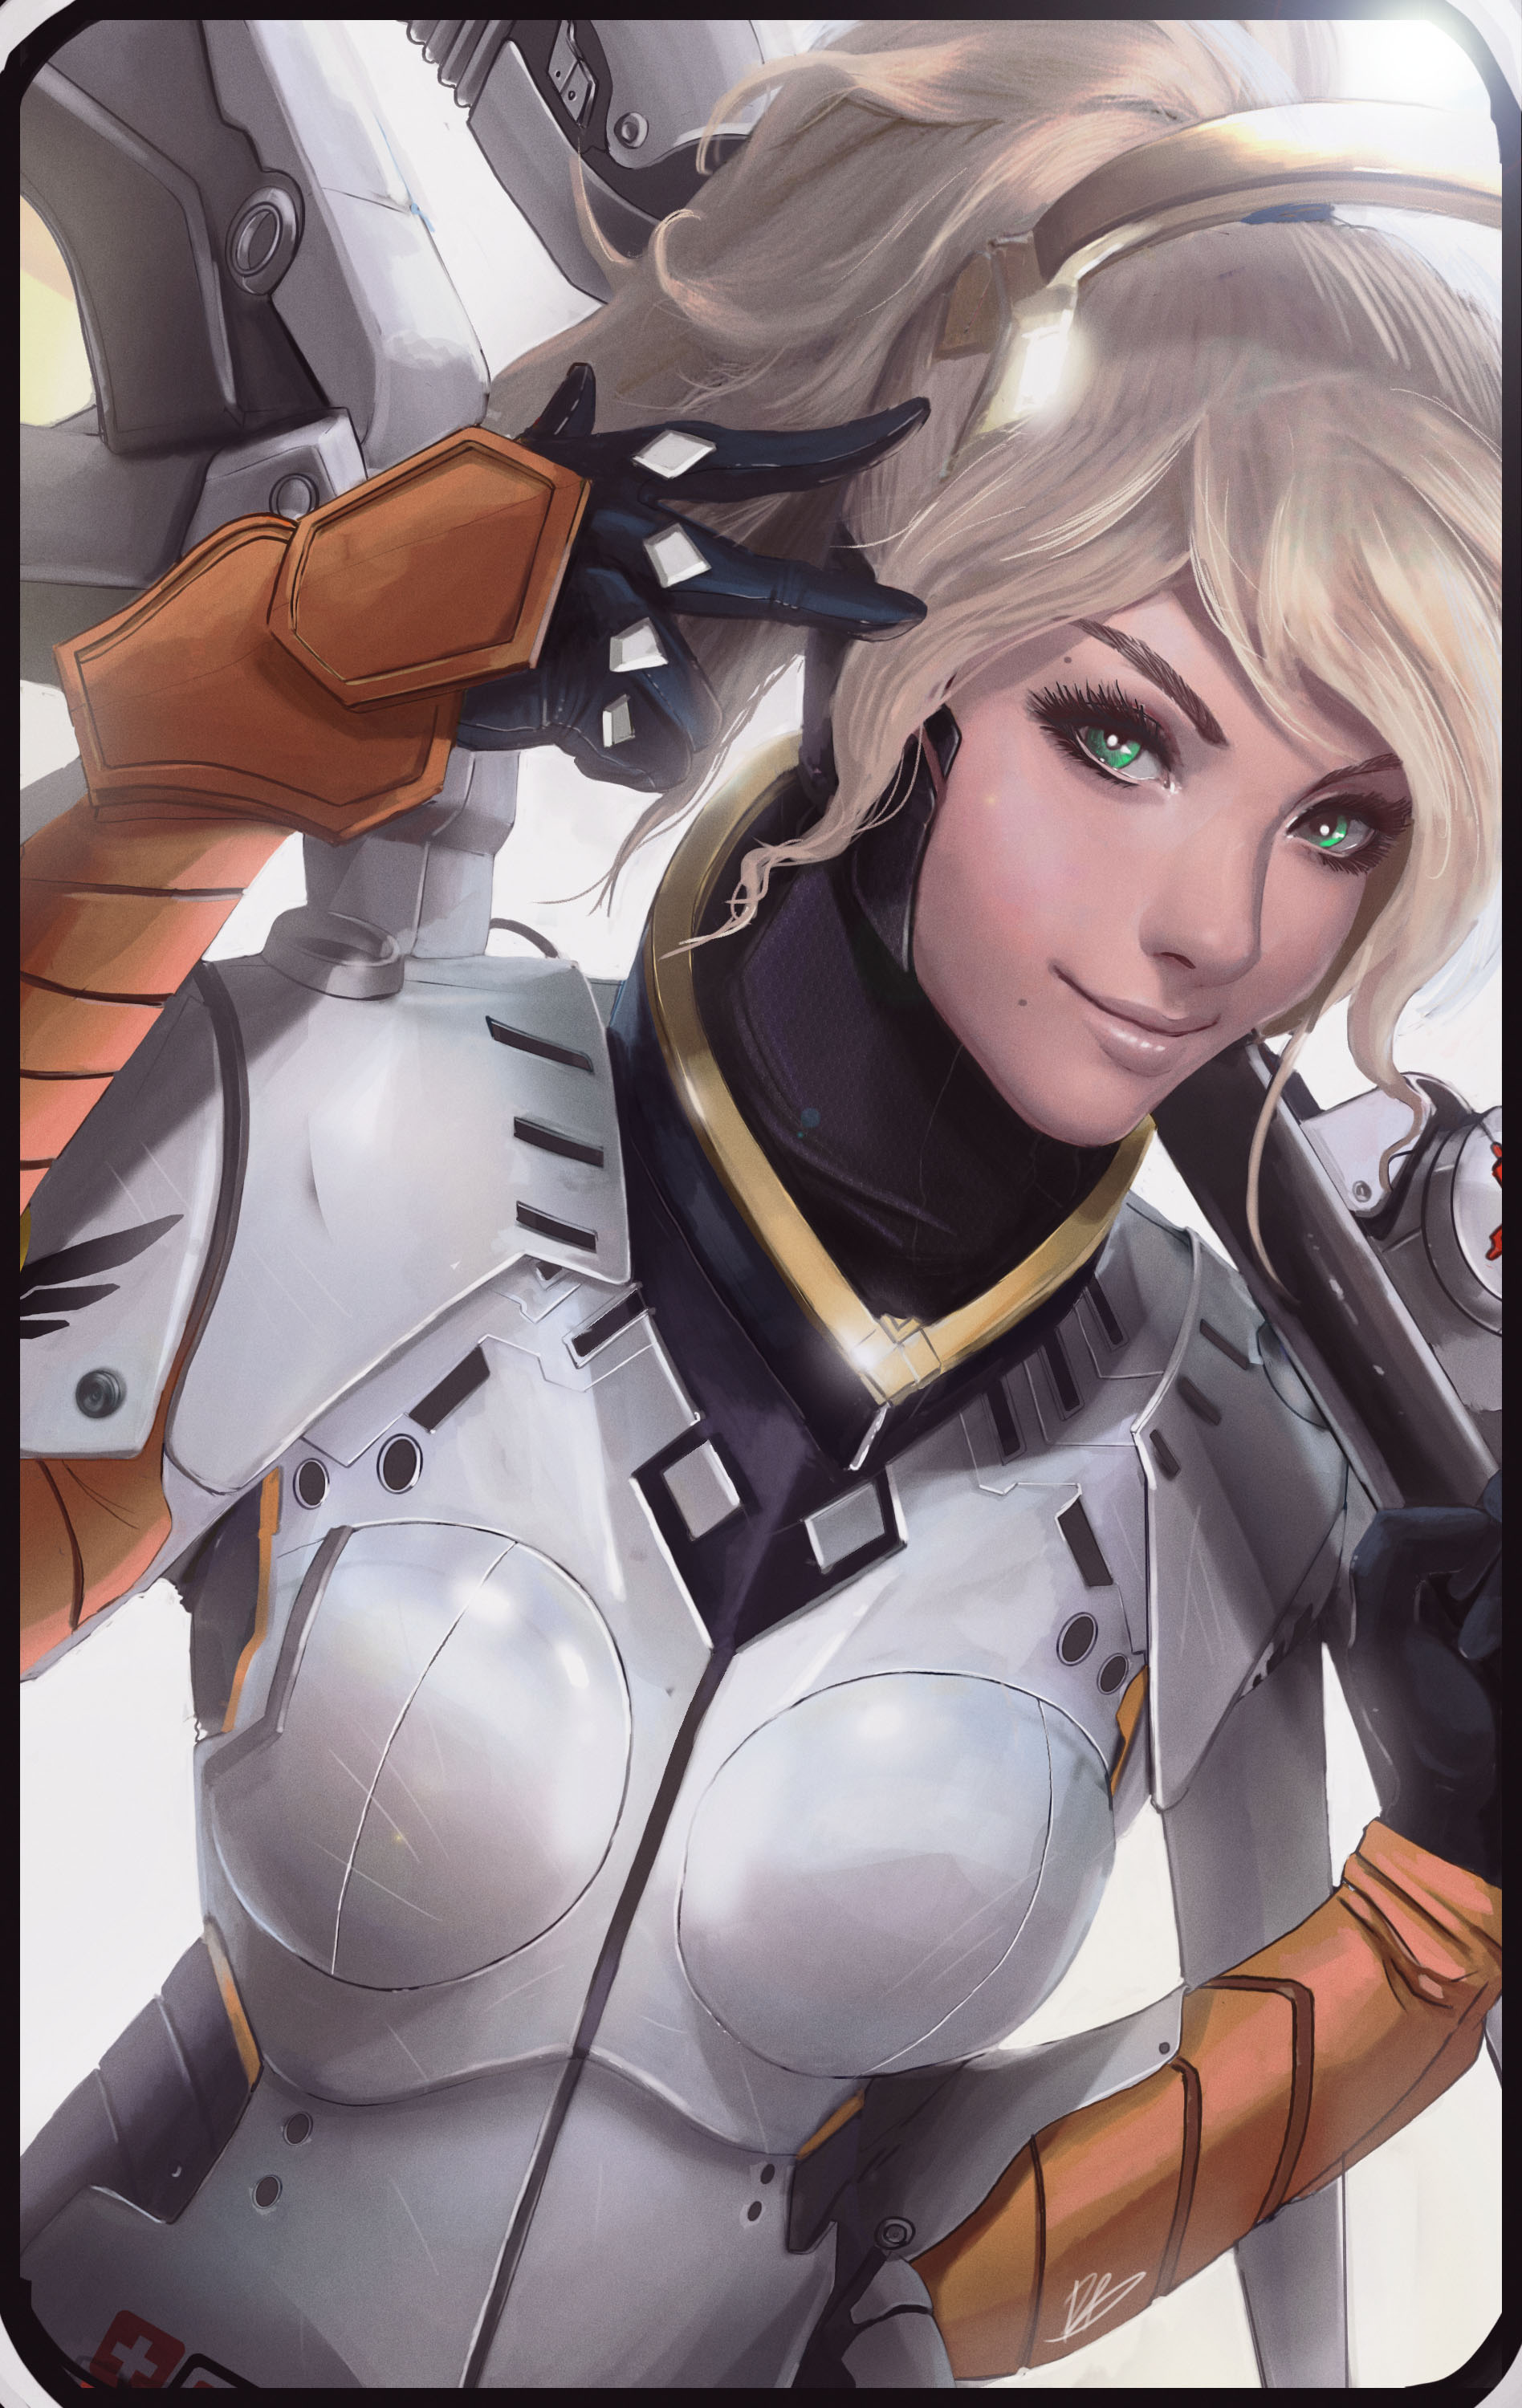  Hottest Overwatch Characters: All the Sexy Ladies, Ranked | XXX Blog Post